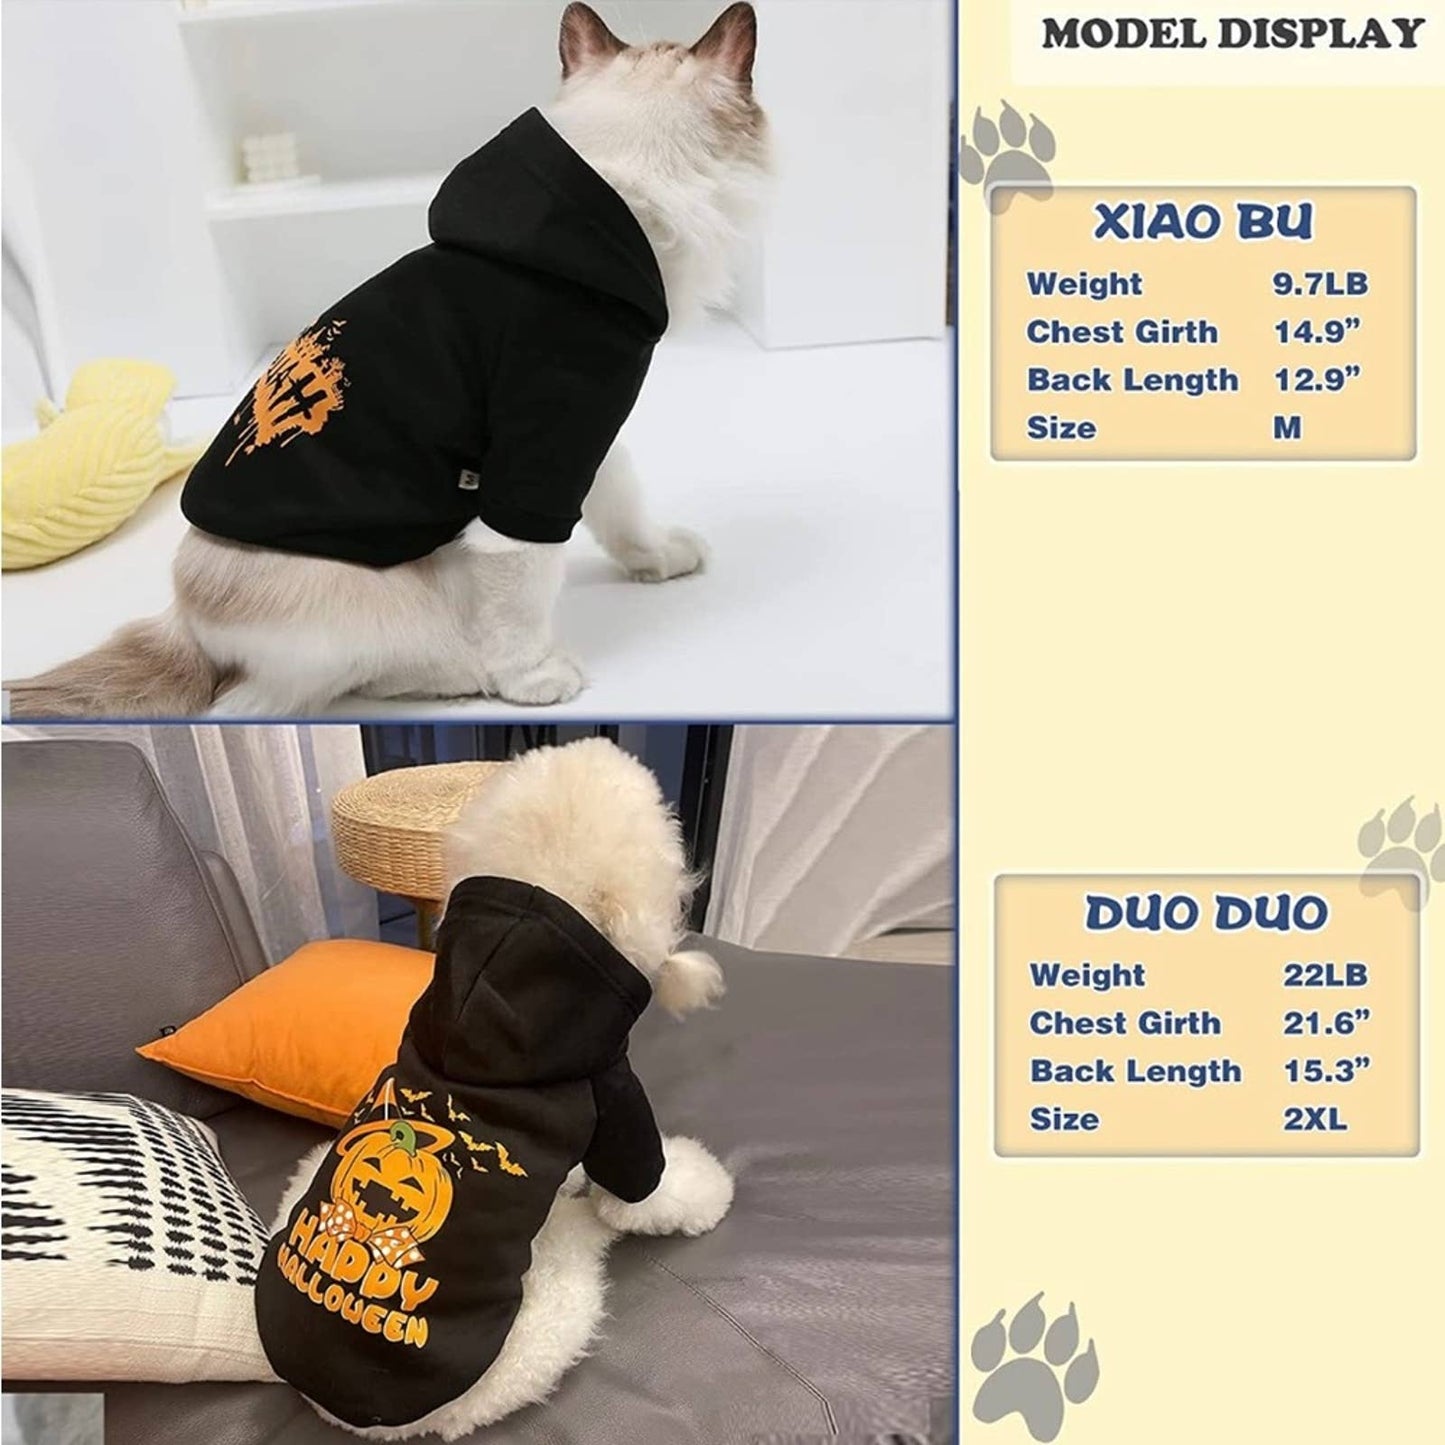 2XL Dog Hoodie for Puppy and Kitty Made of Soft Comfortable Fabric Pattern